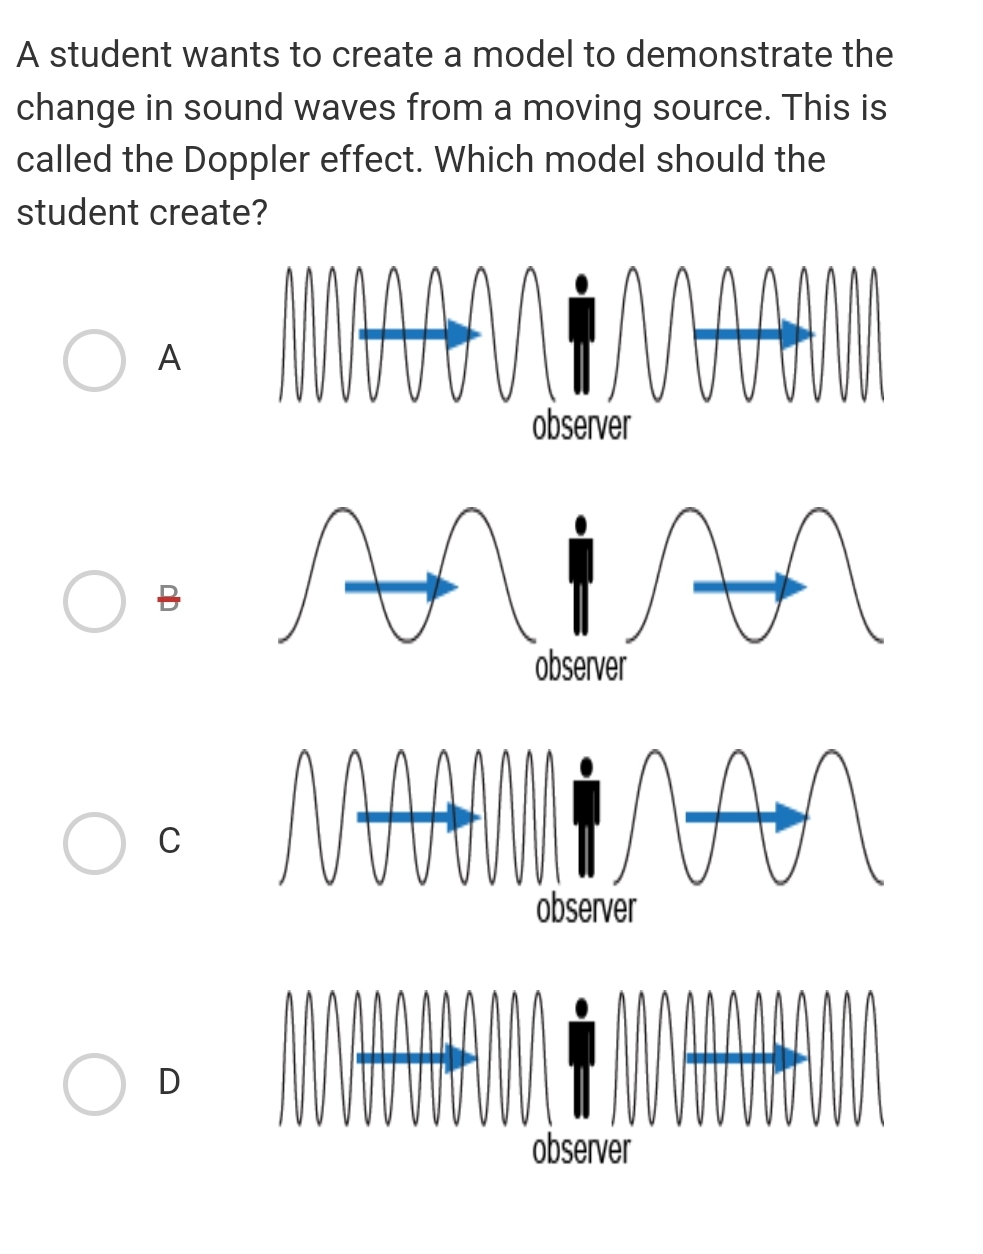 A student wants to create a model to demonstrate the
change in sound waves from a moving source. This is
called the Doppler effect. Which model should the
student create?
MAAN İMAAAM
An
A
ab
C
D
observer
An
MAAMİNAN
лал
observer
observer
observer